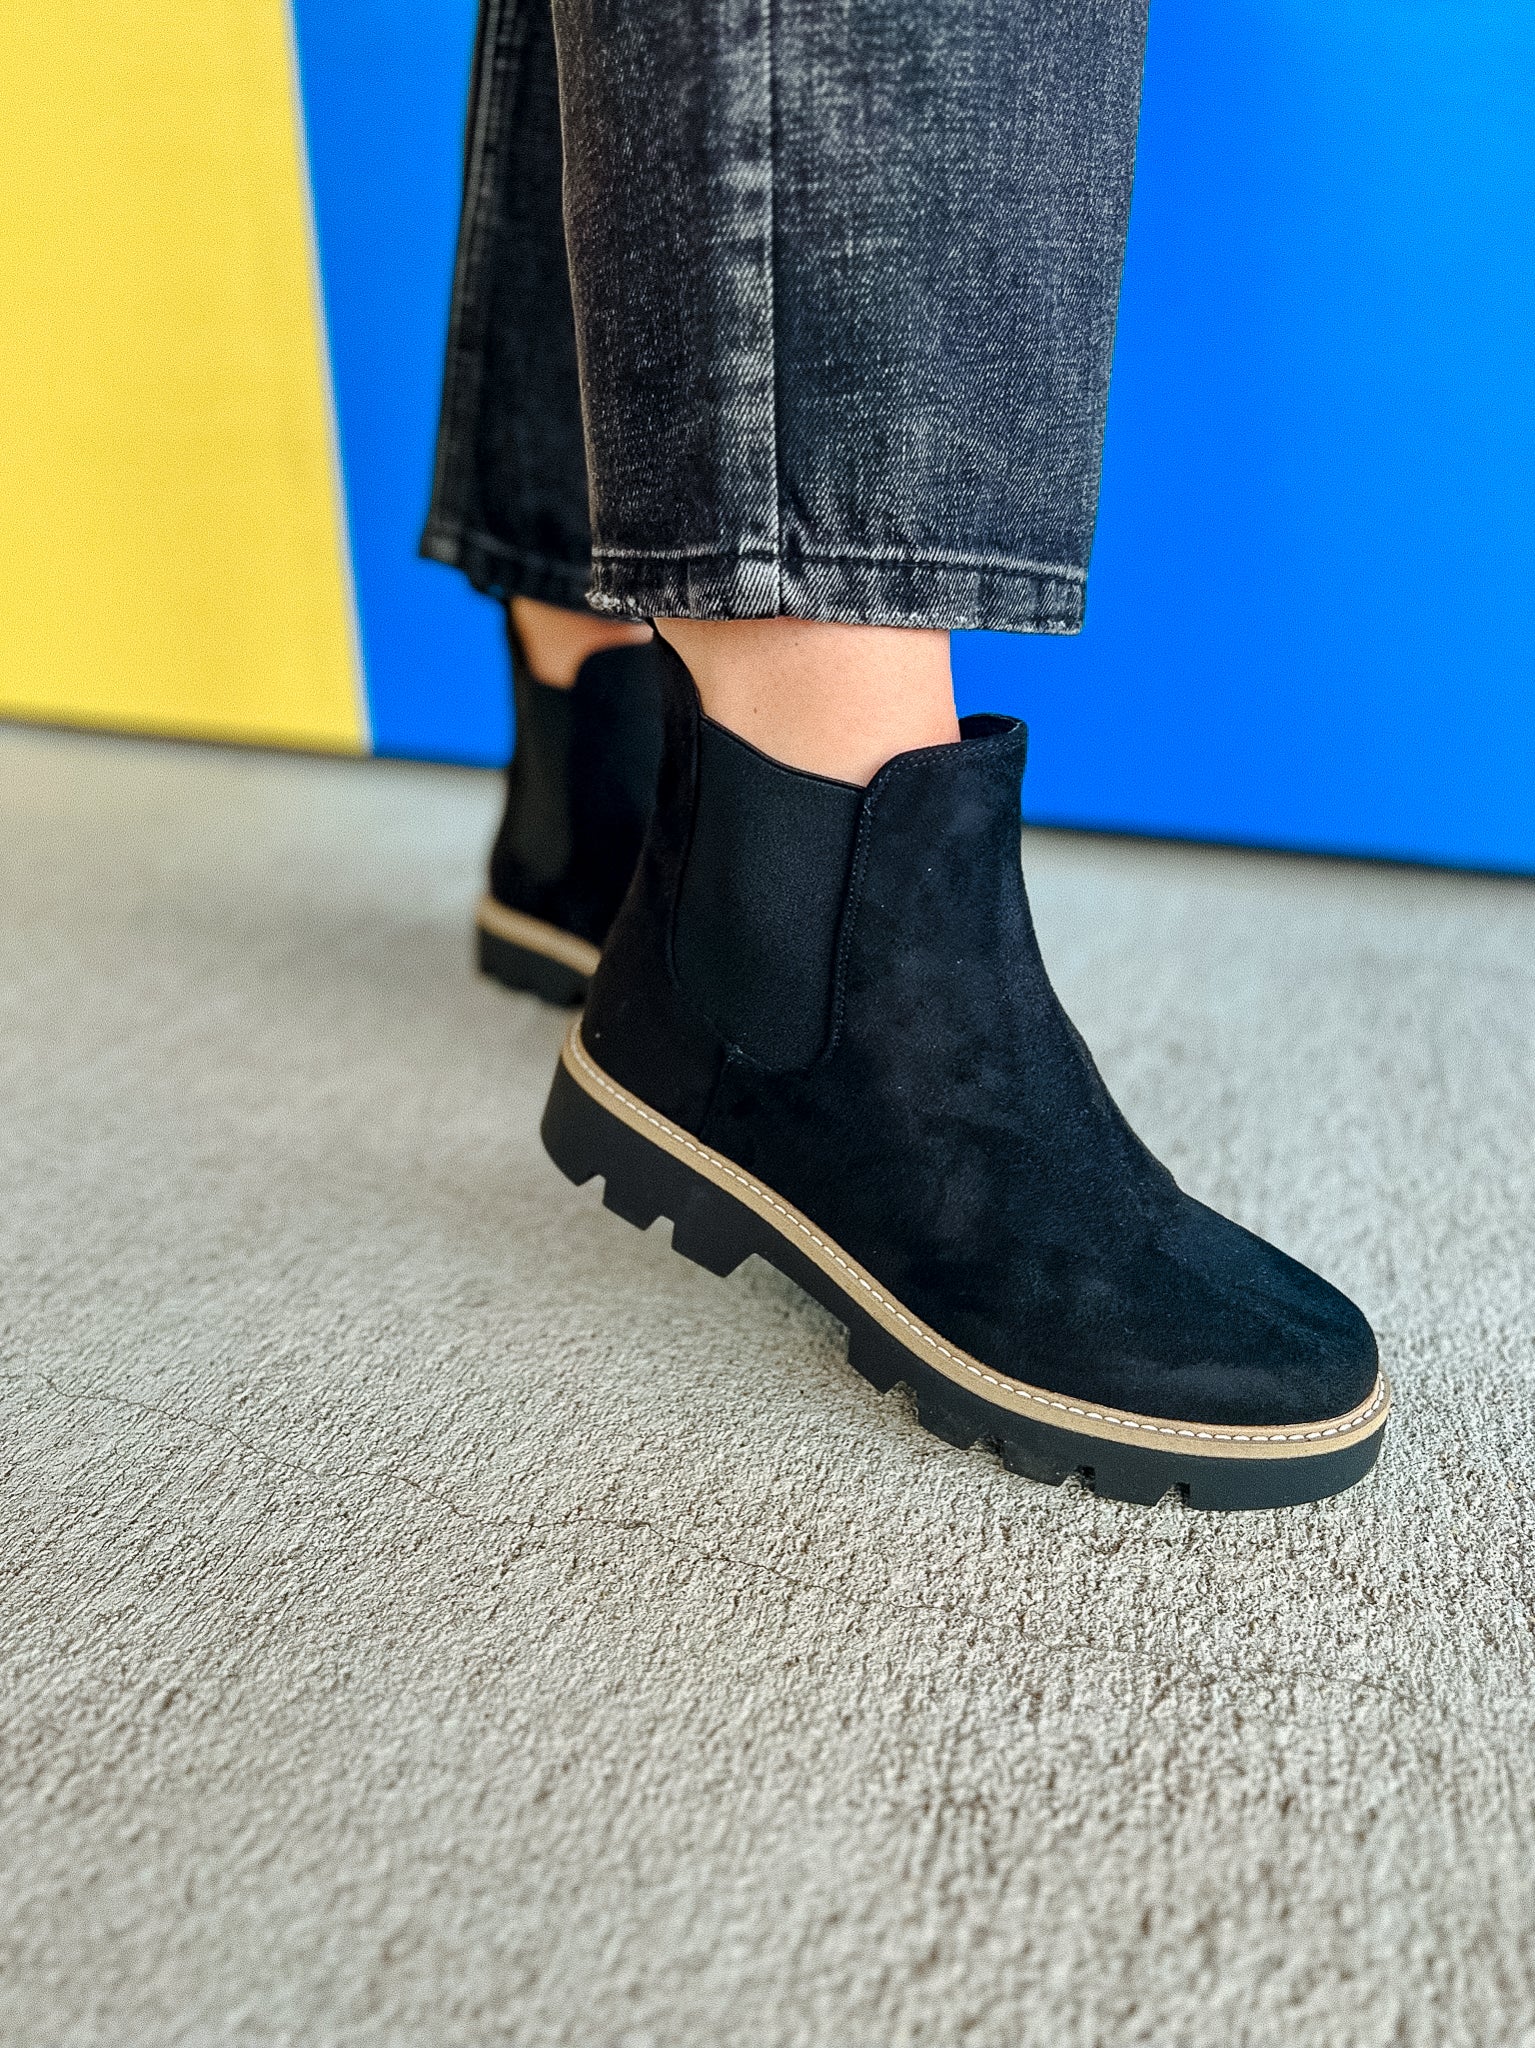 [Chinese Laundry] Piper Suede Boots - Black